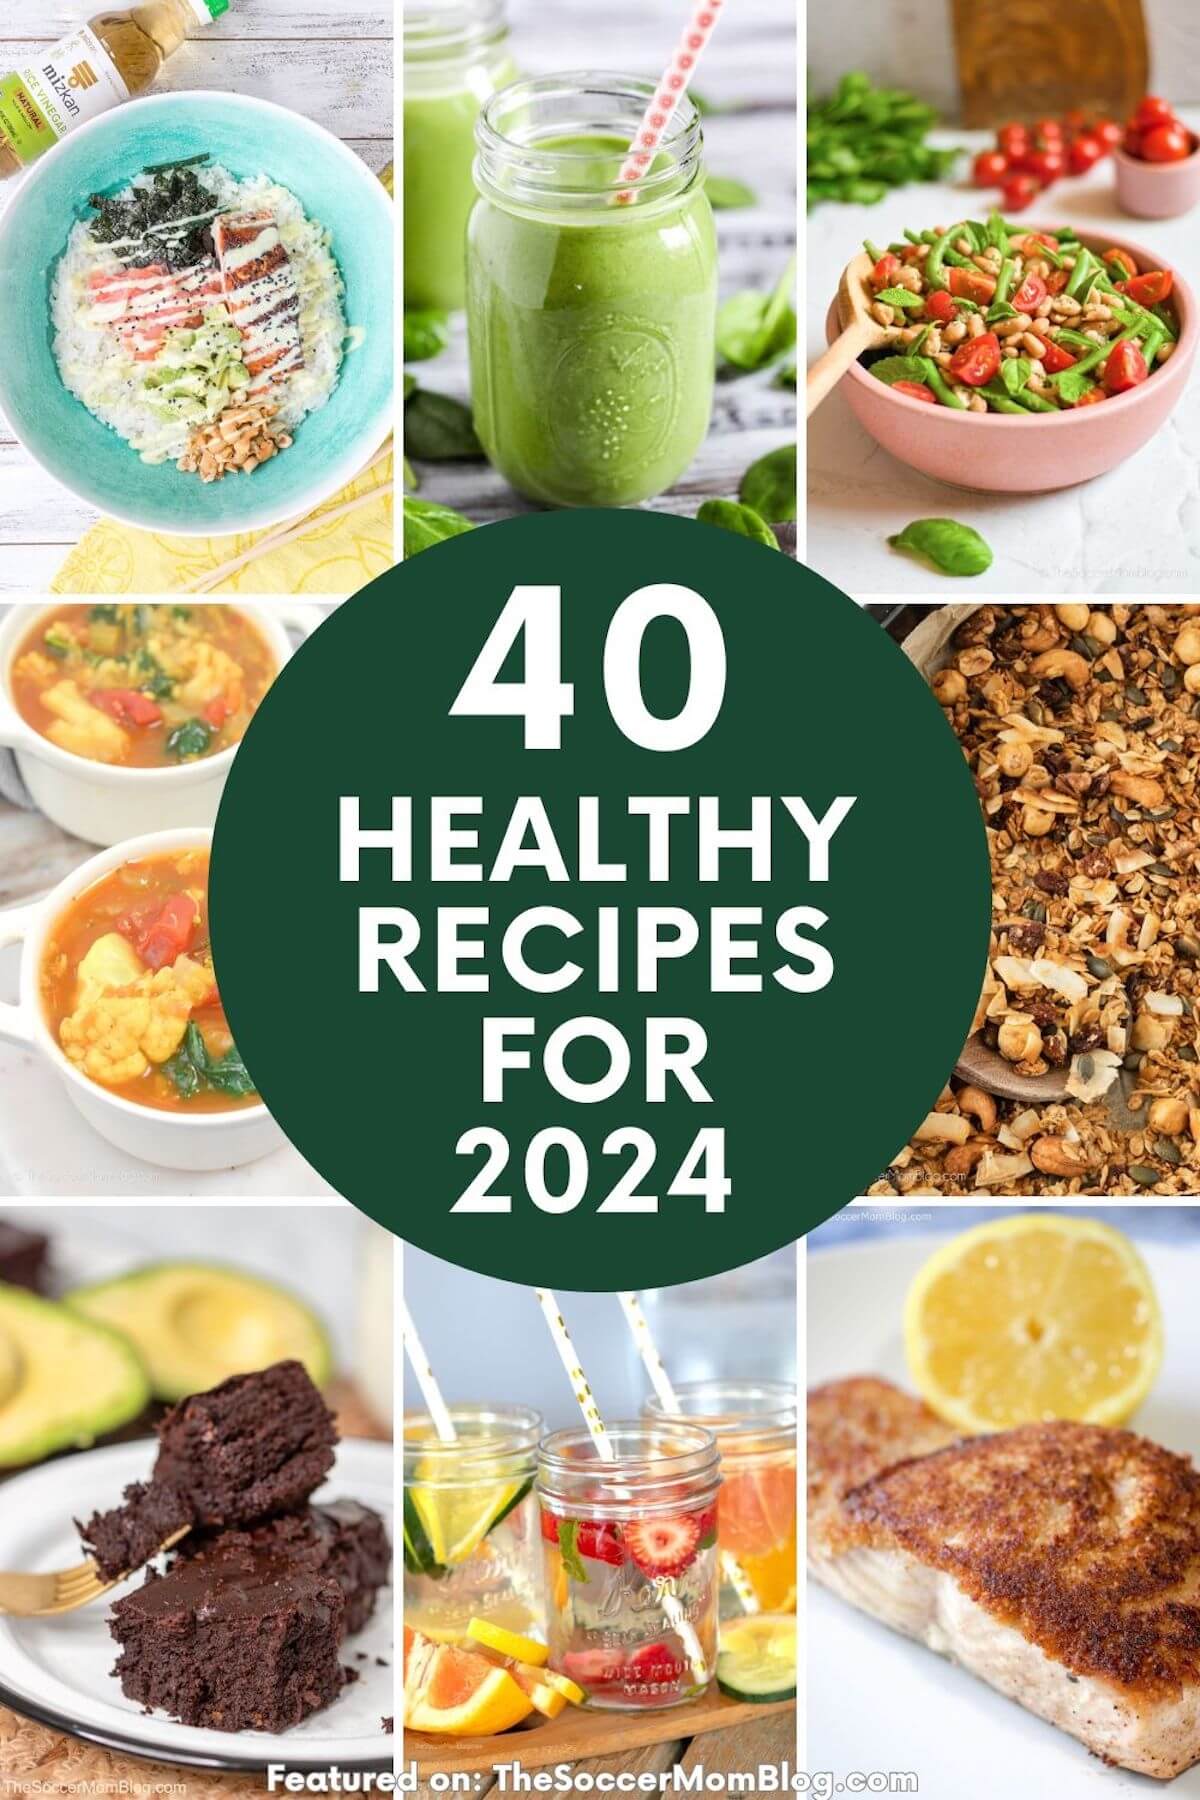 collage of healthy meals; text overlay "40 Healthy Recipes for 2024".